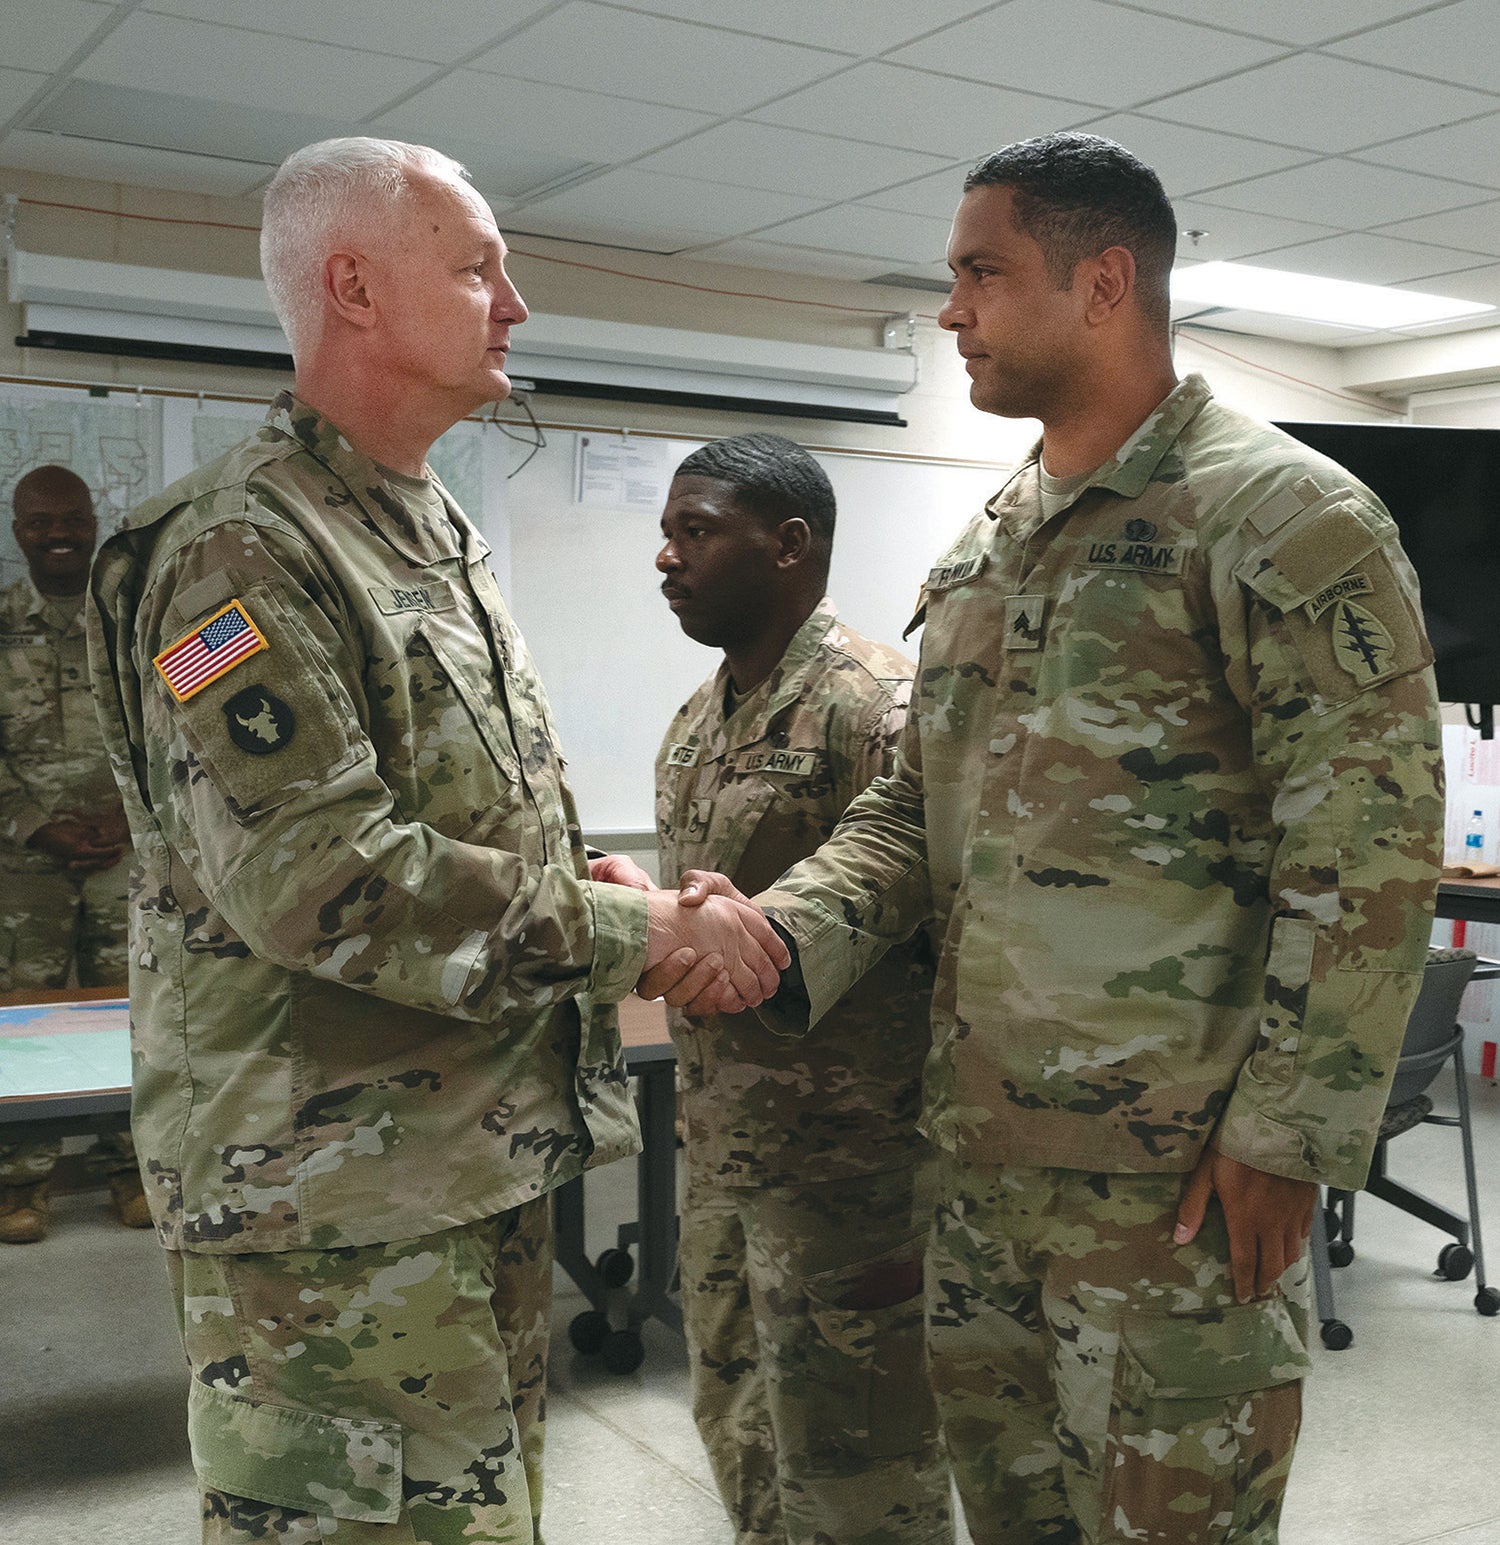 Lt. Gen. Jon Jensen, left, director of the Army National Guard, presents a coin to Sgt. Travarus Franklin of the Alabama Army National Guard during an exercise at Camp Grayling Joint Maneuver Training Center, Michigan. (Credit: Army National Guard/ Sgt. 1st Class Jon Soucy) 